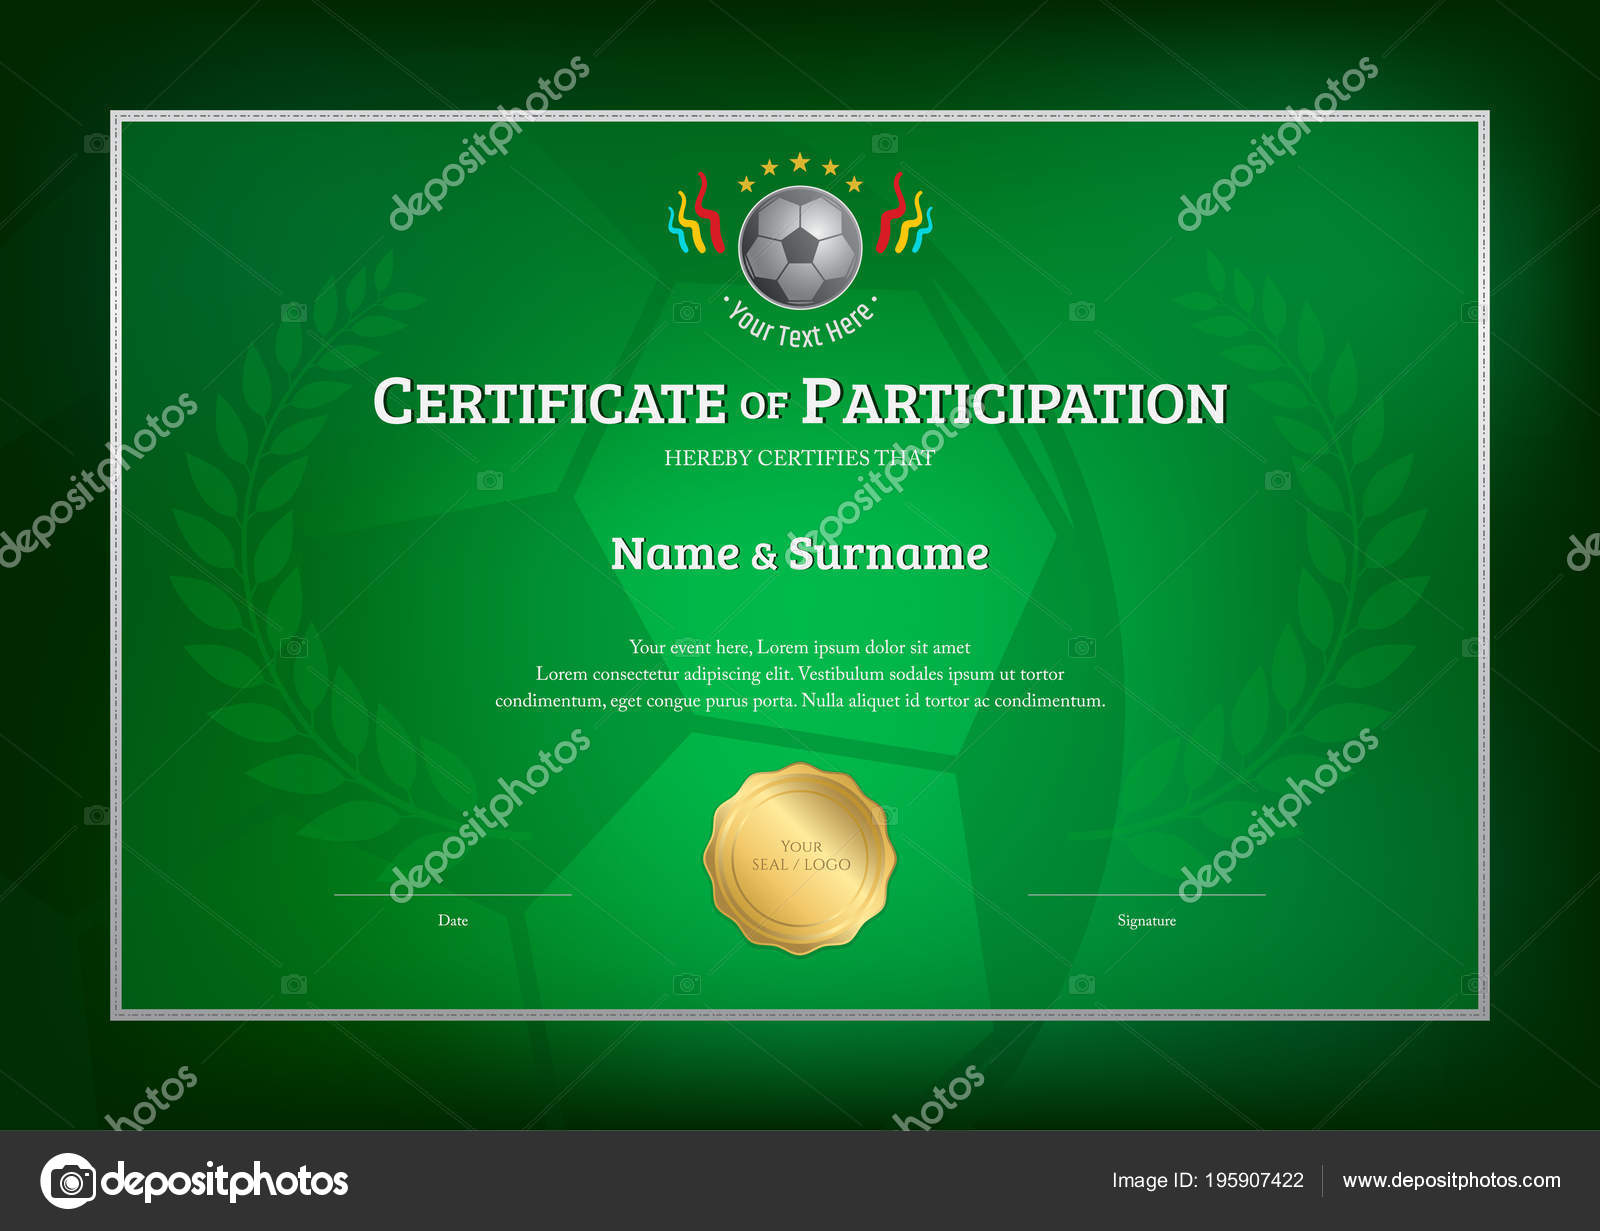 Certificate soccer, Royalty-free Certificate soccer Vector Images Intended For Rugby League Certificate Templates